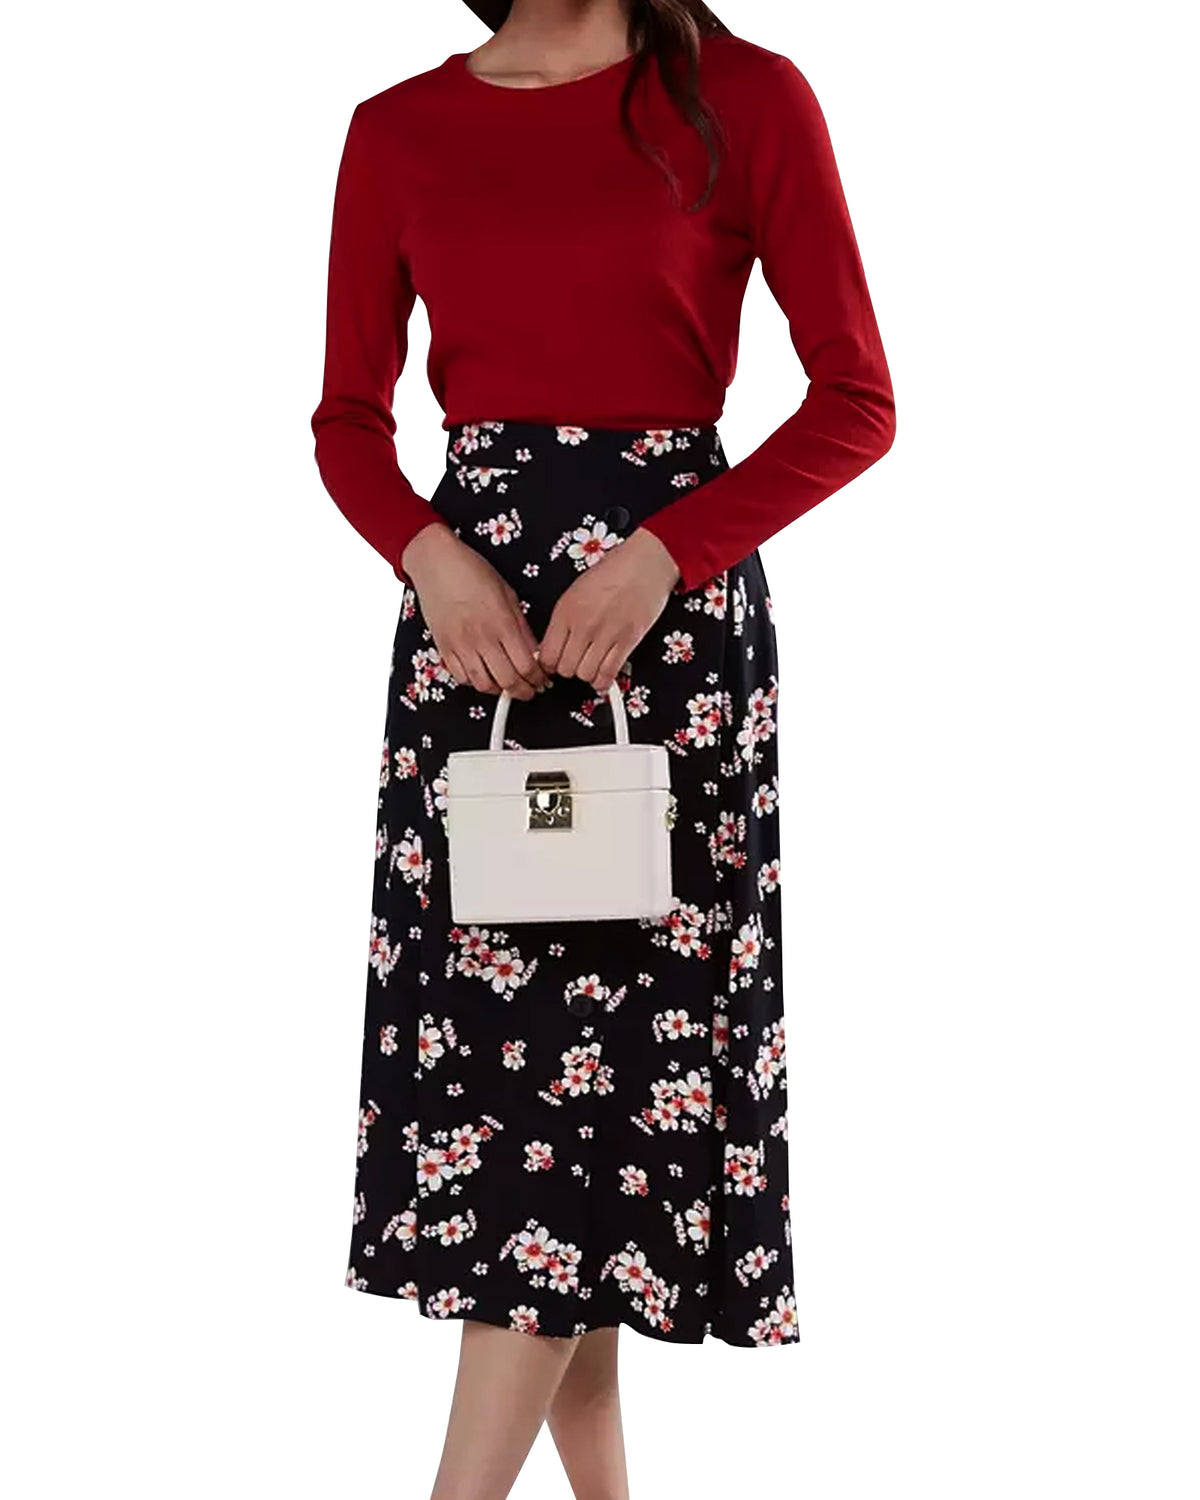 Women's Floral Printed Midi Skirt with Button Detail